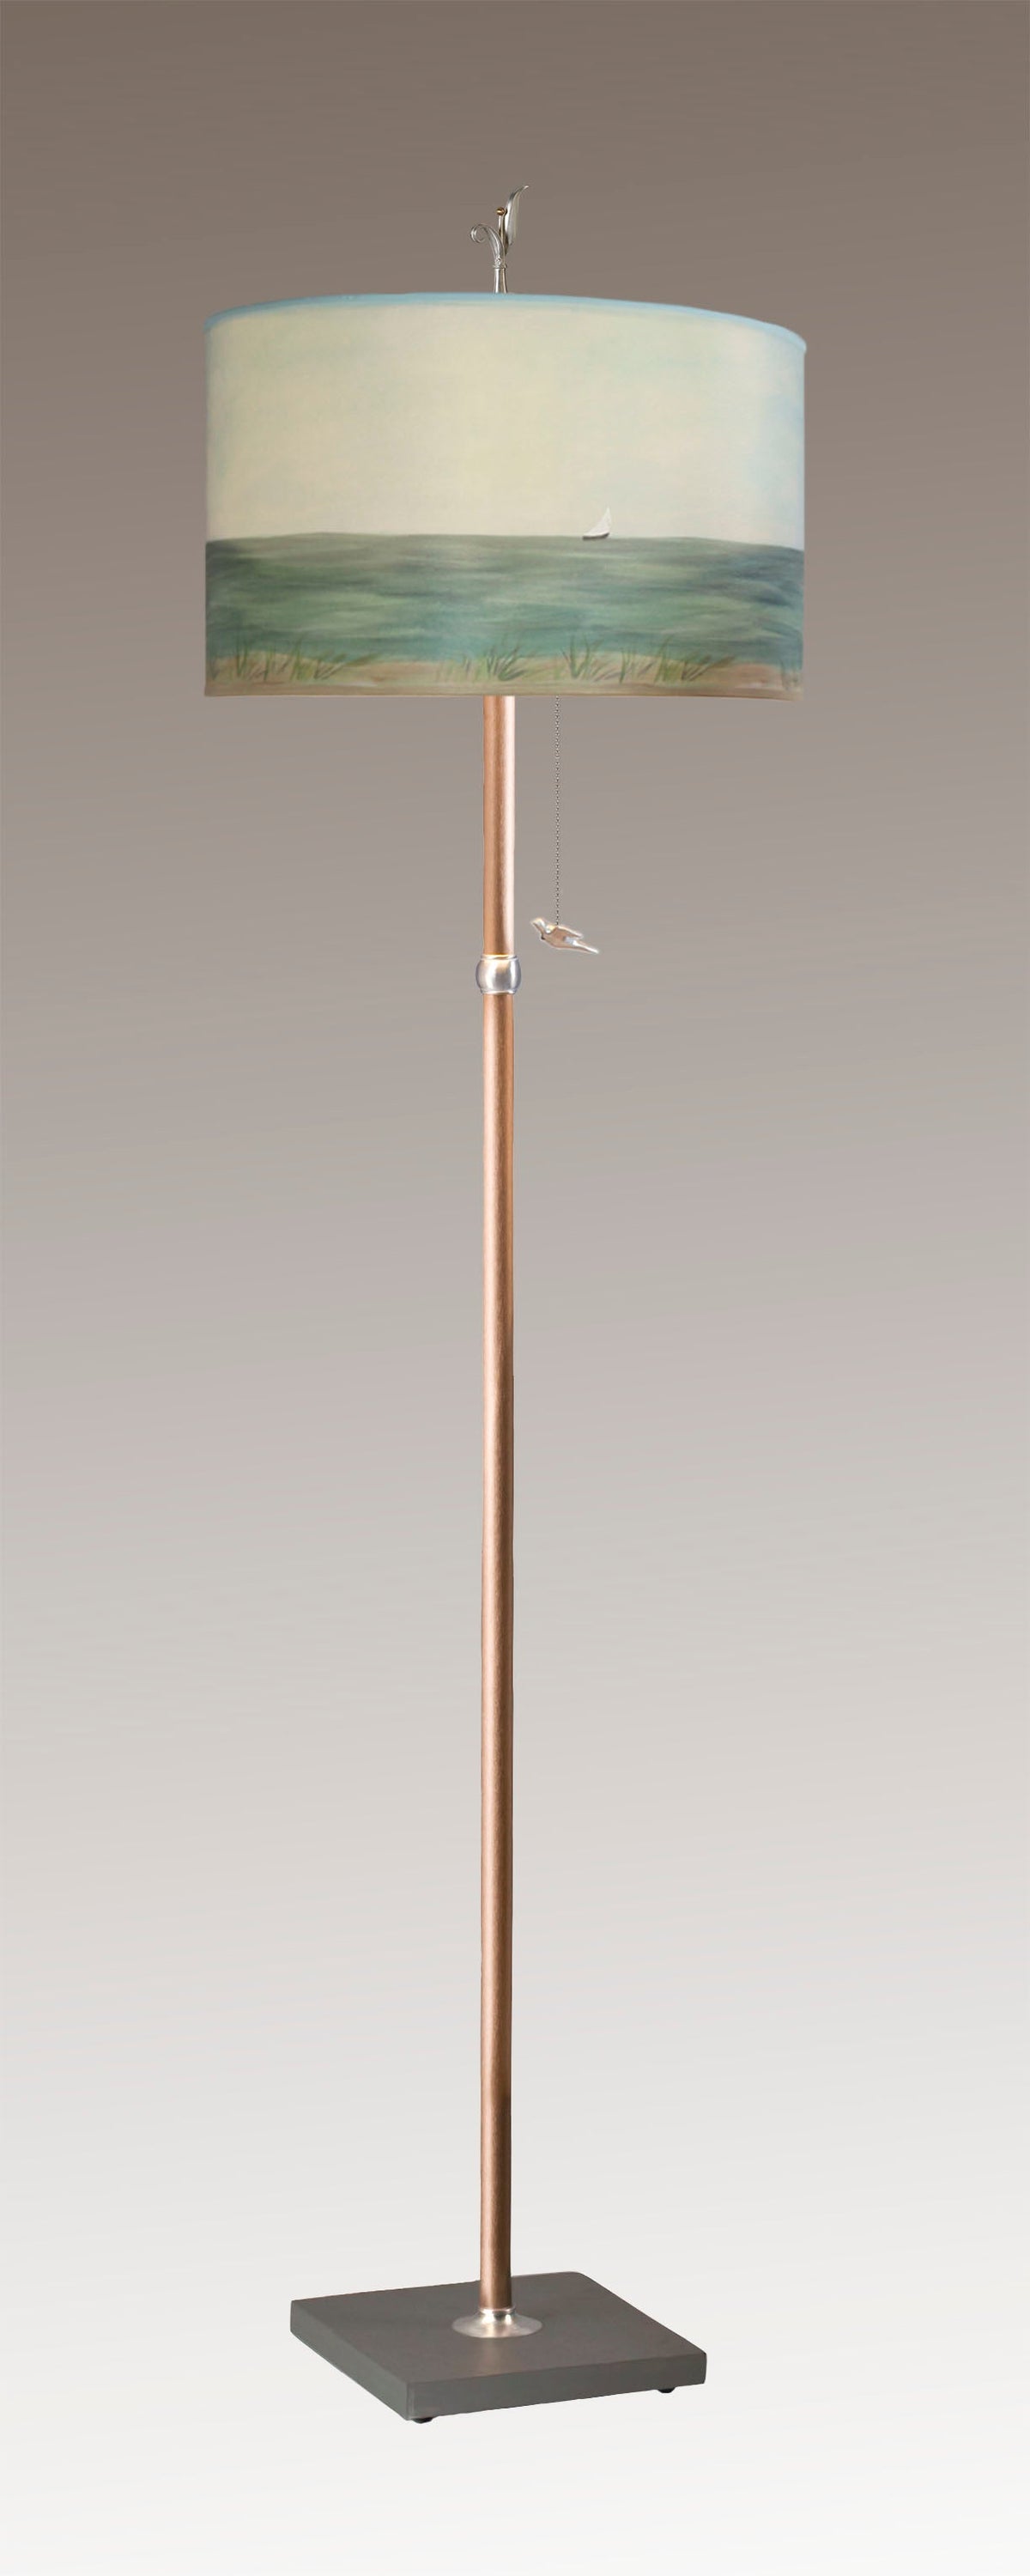 Copper Floor Lamp with Large Drum Lampshade in Shore